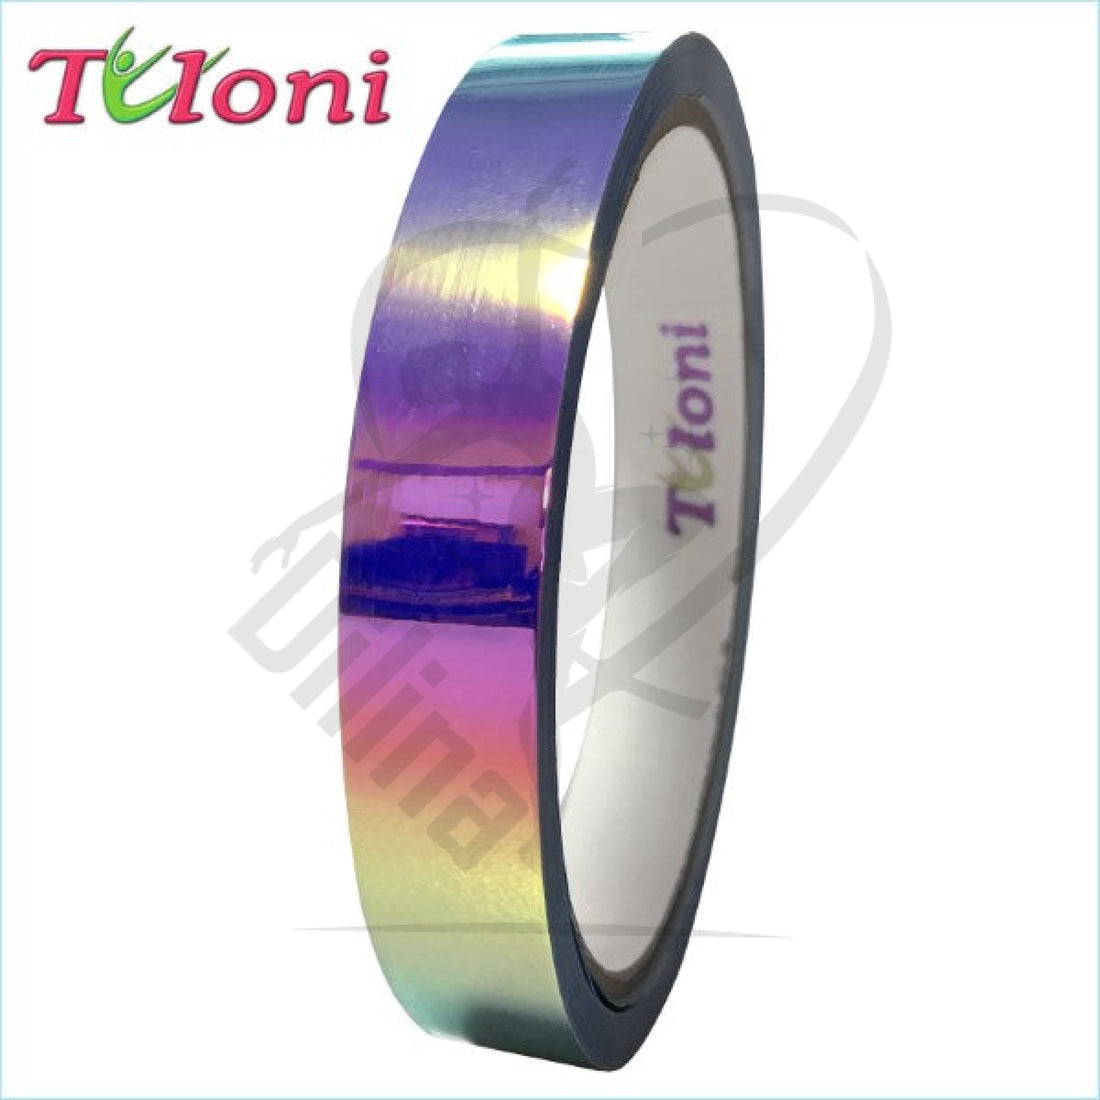 Tuloni Holographic Tape Lilac Tapes